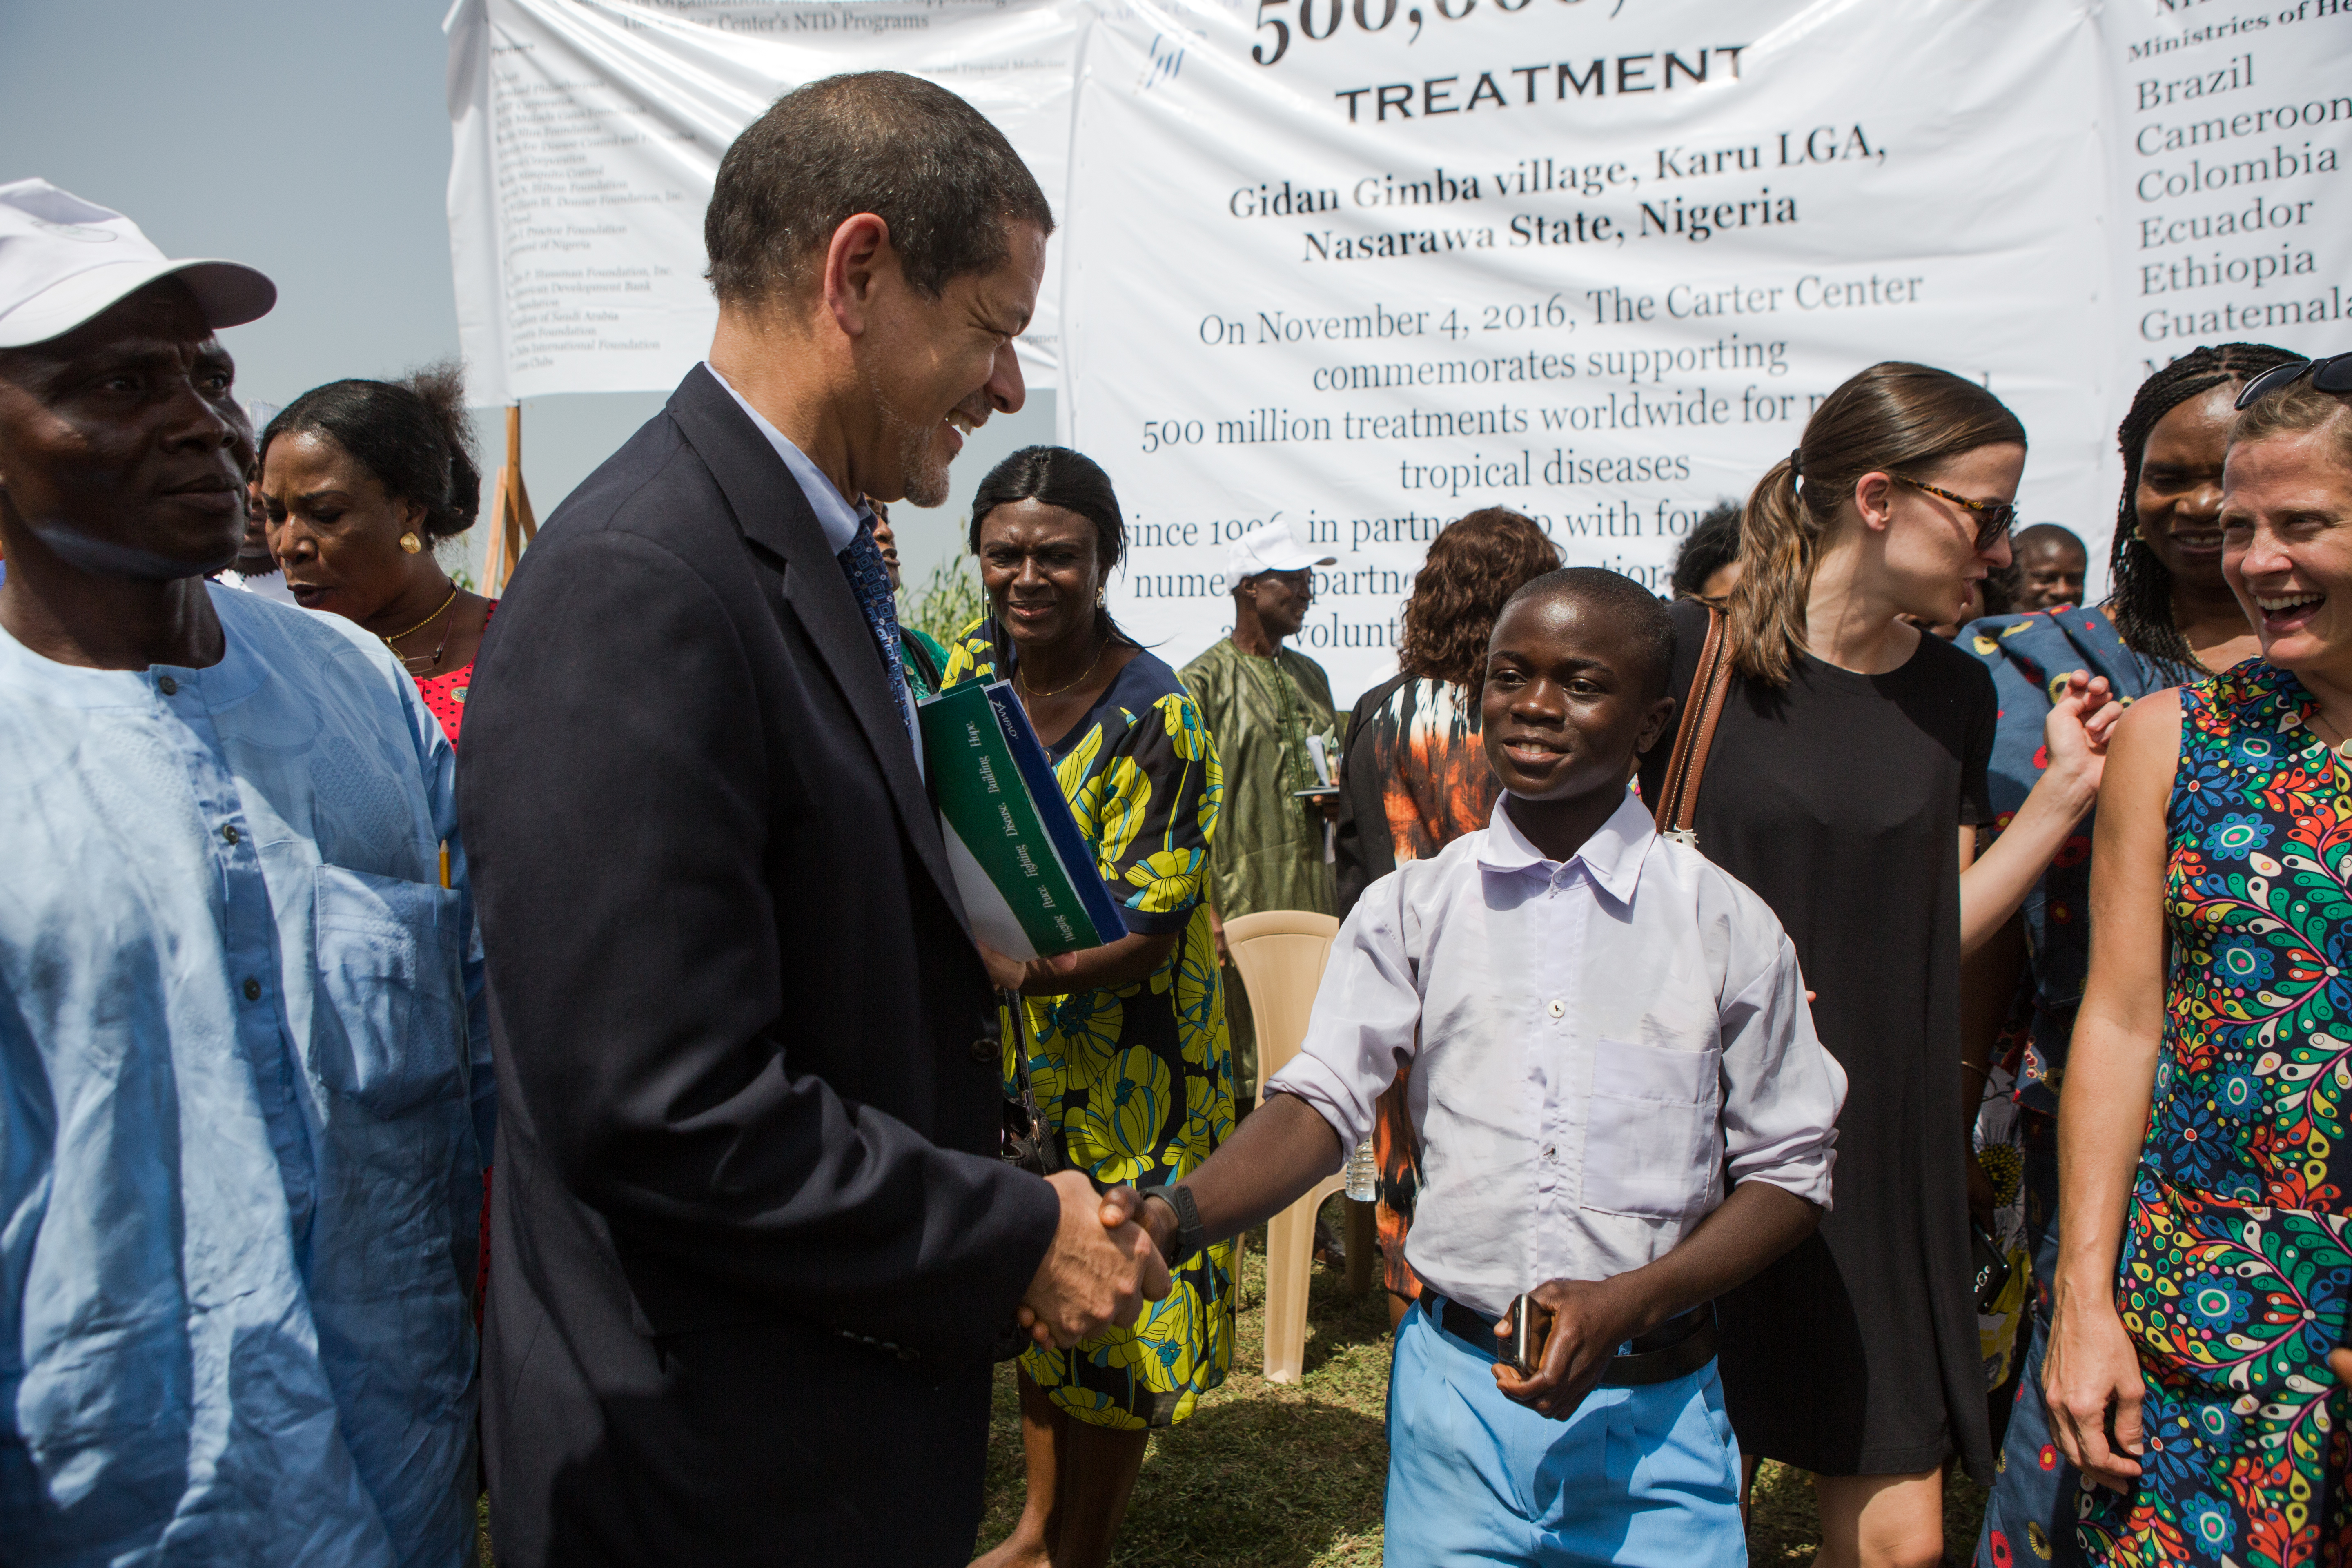 Jude, was the reciever of the 500 millionith dose from the Carter Center on 4th November 2016. He shakes Frank Richards hand during the 500 millionith ceremony in Gidan Gimba, Nasarawa State, Nigeria